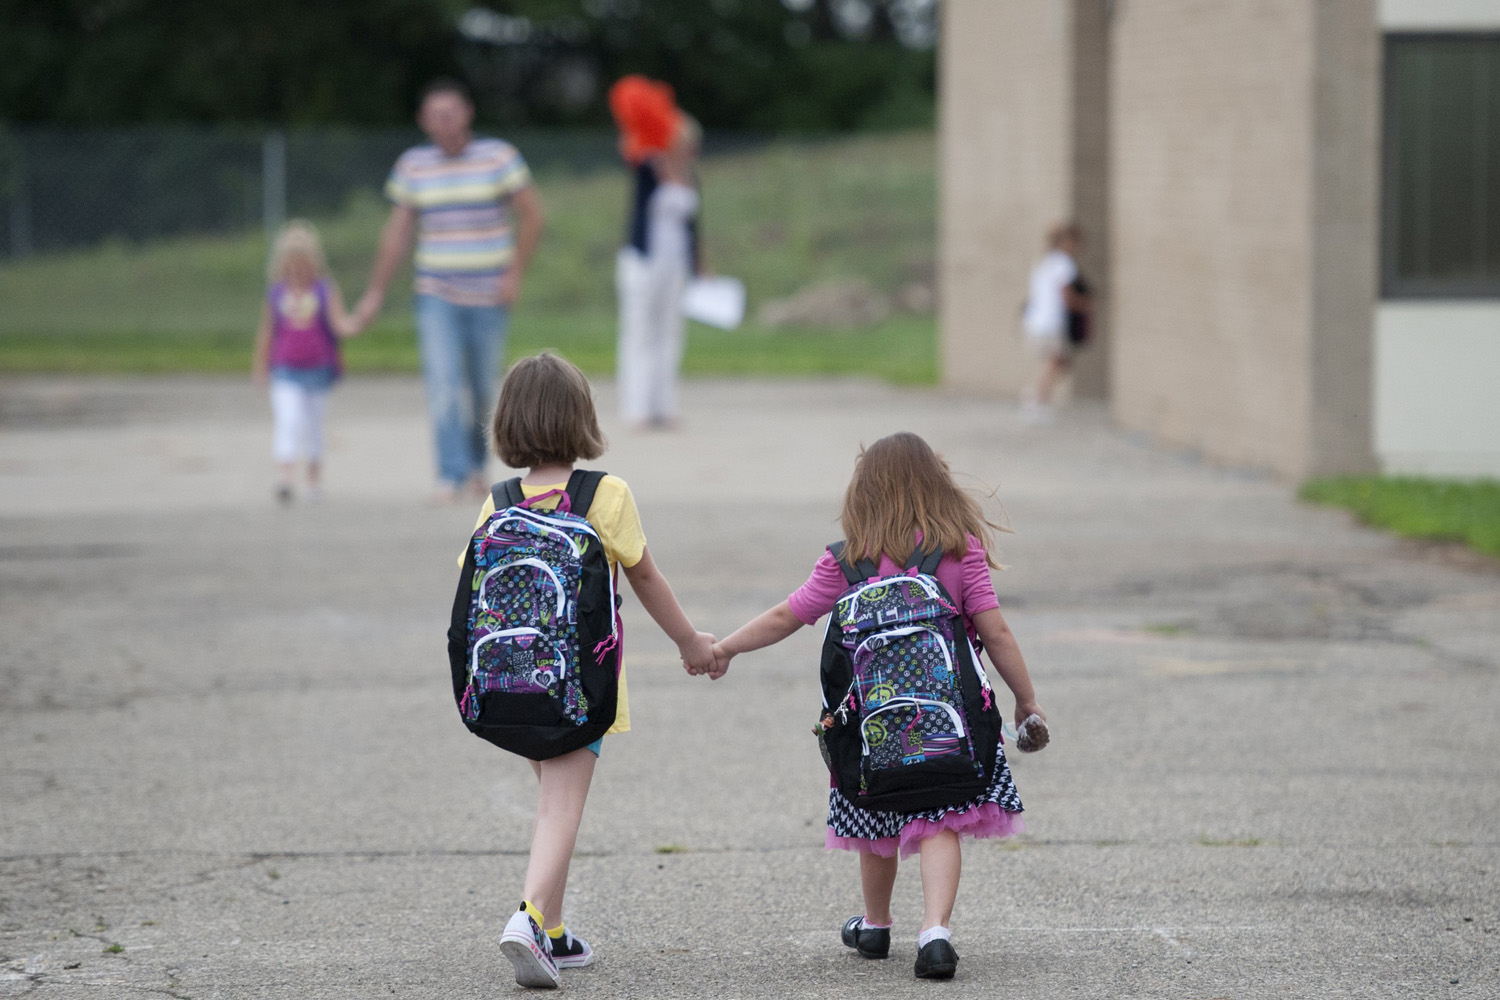 Students hold hands as they walk from the bus to classrooms at Parnall Elementary School in Jackson, Miss. on Sept. 2, 2014.